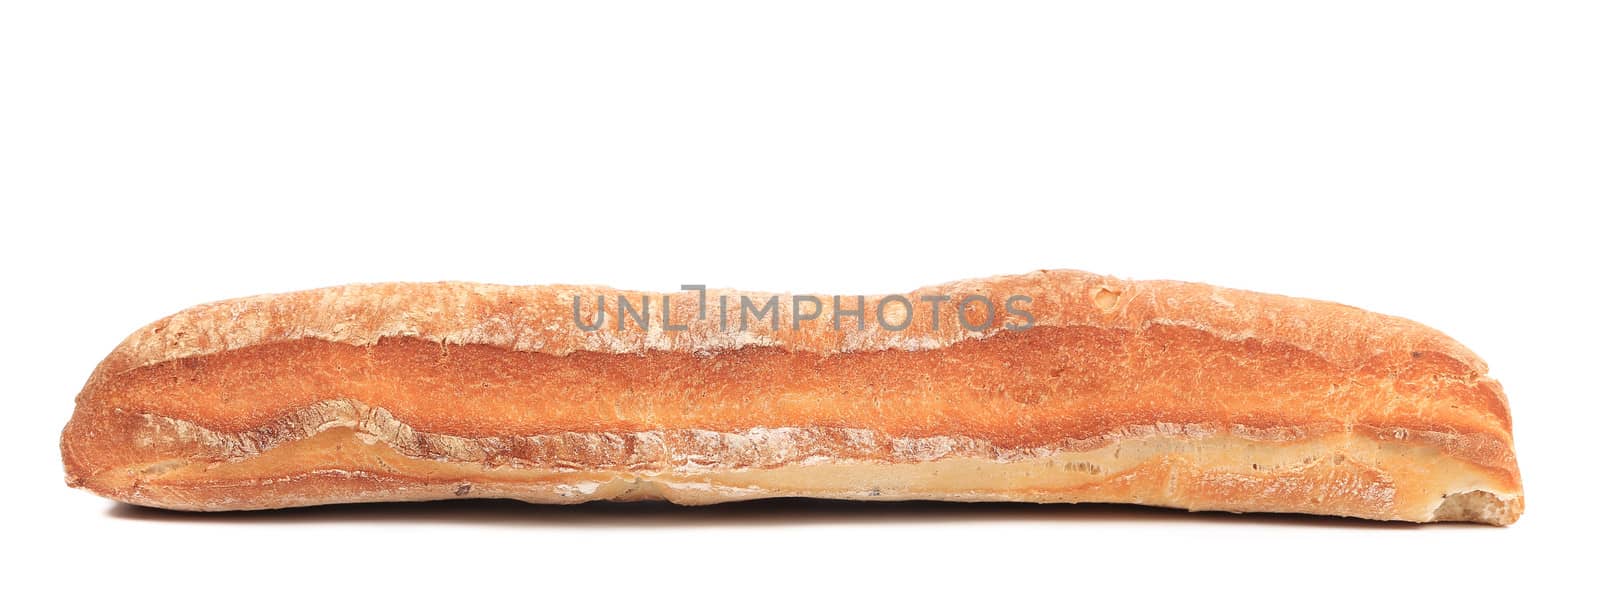 Crackling white bread. Isolated on a white background.